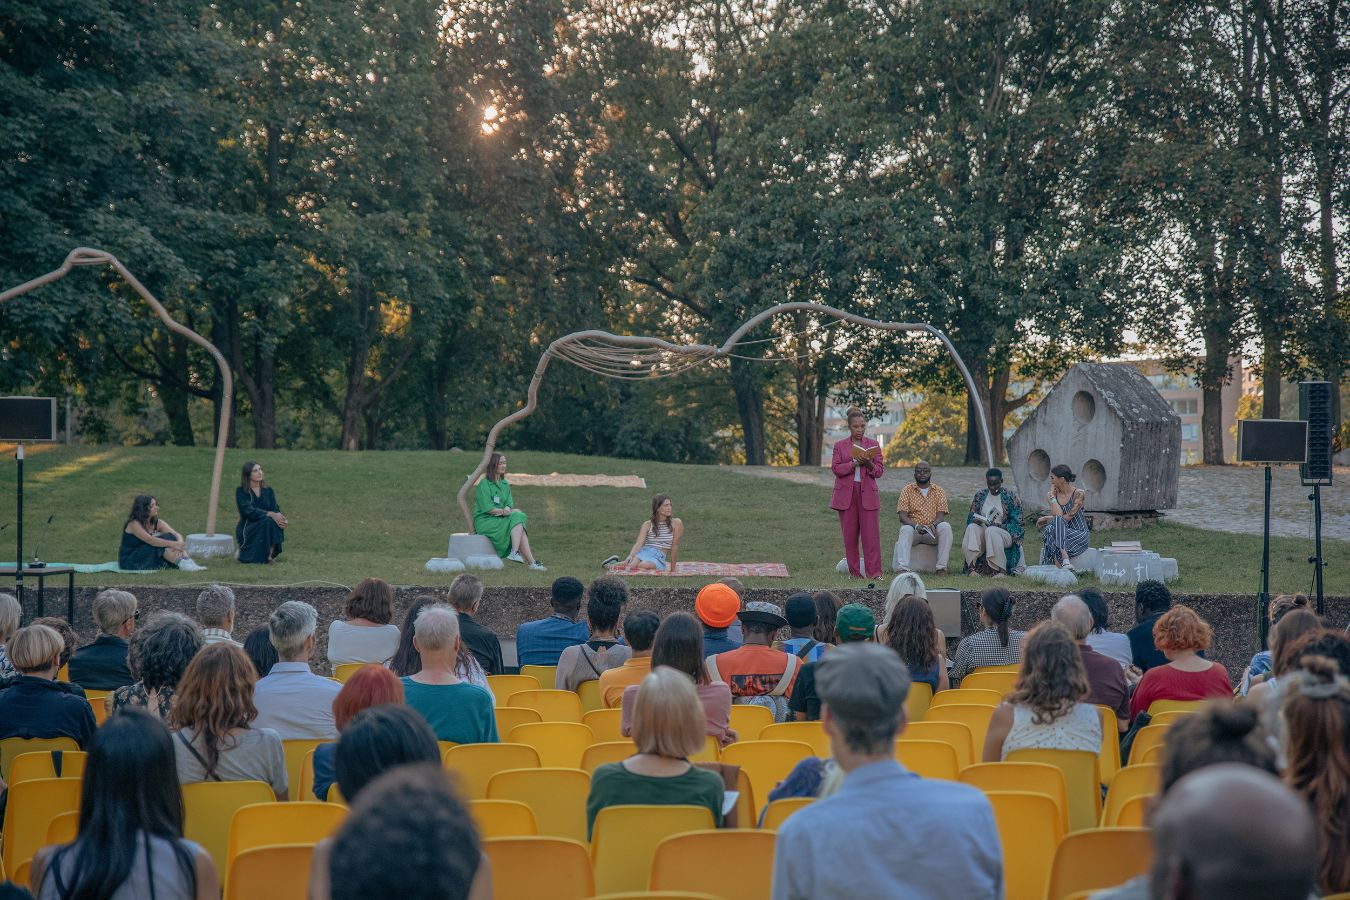 Abak Safaei-Rad reads excerpts from the eight shortlisted books together with members of the HKW team in the Forough Farrokhzad Garden, Haus der Kulturen der Welt,&nbsp;9.9.2023, Haus der Kulturen der Welt.
